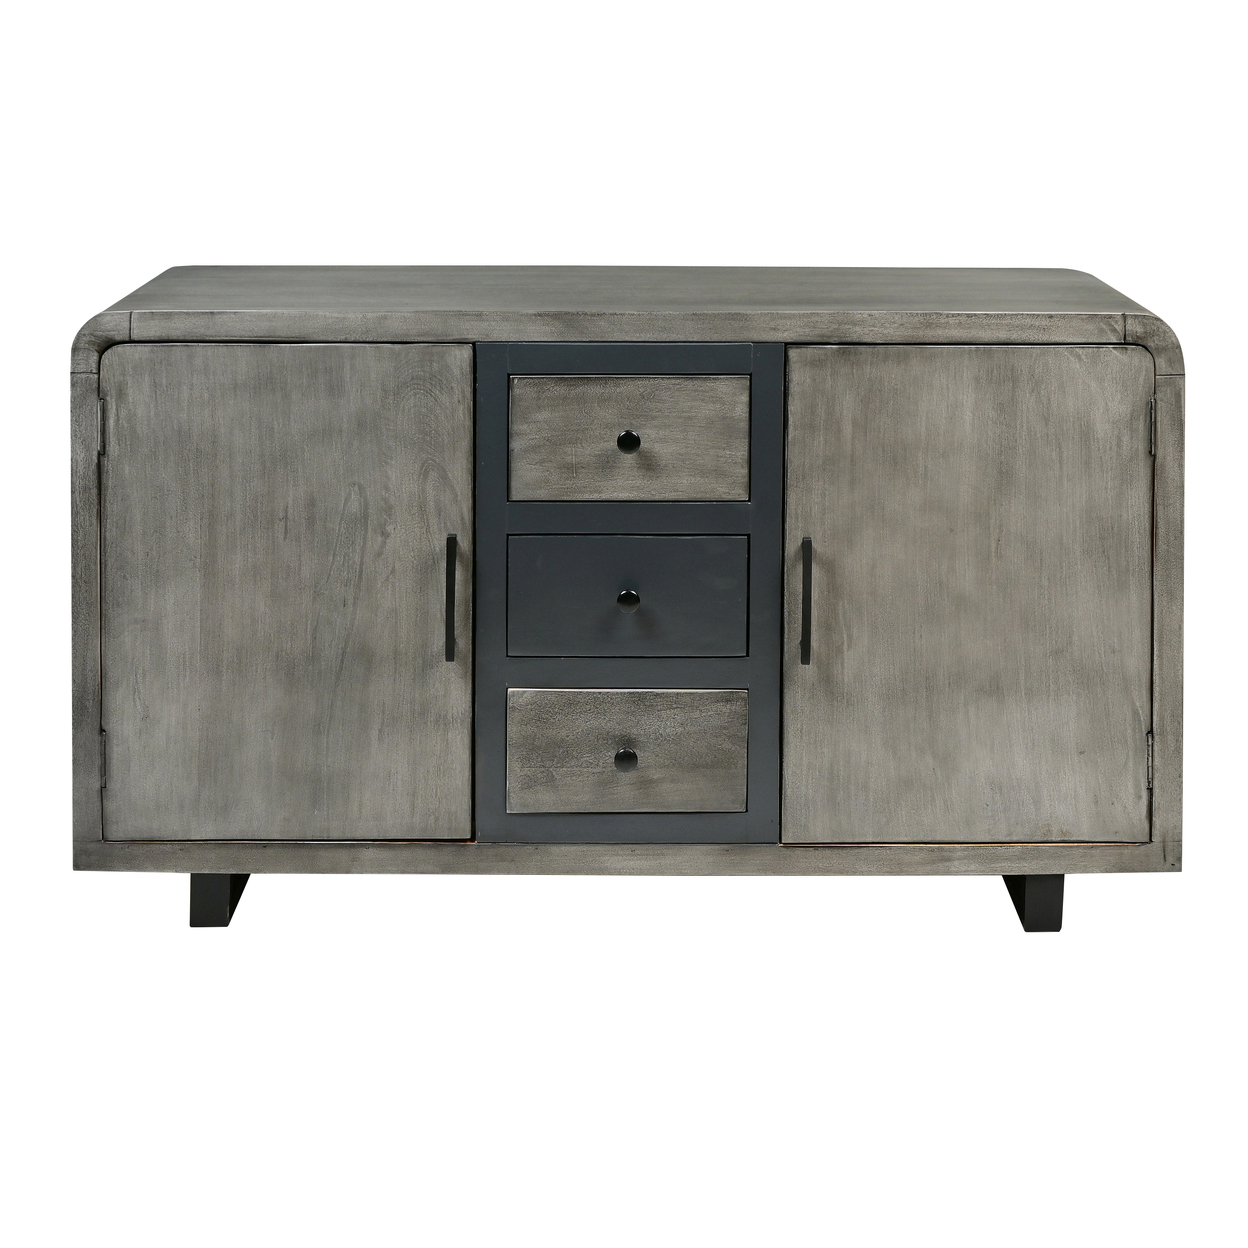 55 Inch Industrial Style Sideboard Console With 2 Cabinets, Iron Handles, Matte Gray Mango Wood - Saltoro Sherpi